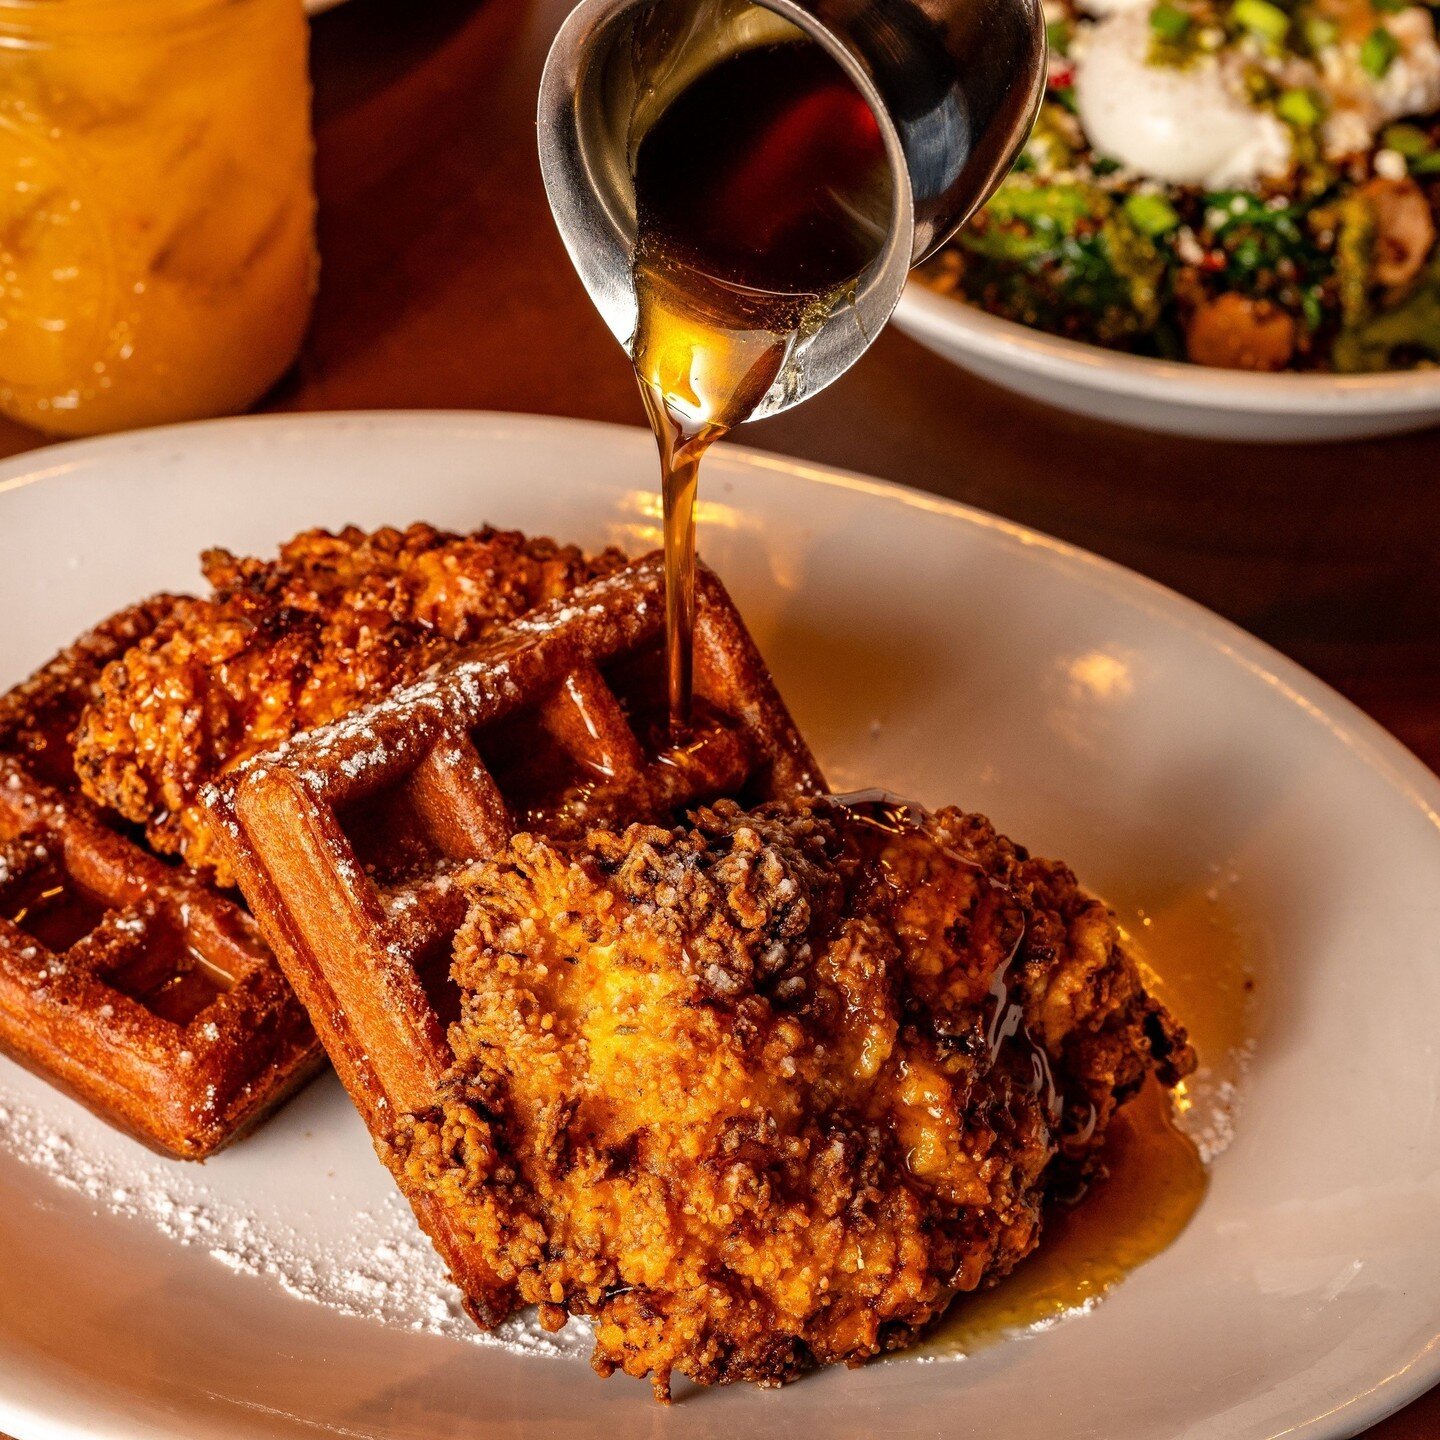 Satisfy your cravings with a plate of our mouthwatering Chicken and Waffles &ndash; a perfect harmony of crispy fried chicken and fluffy waffles drizzled with maple syrup. 🍗🍯🧇 ⁠
⁠
Join us at Rosewood Grill for a brunch experience like no other! #C